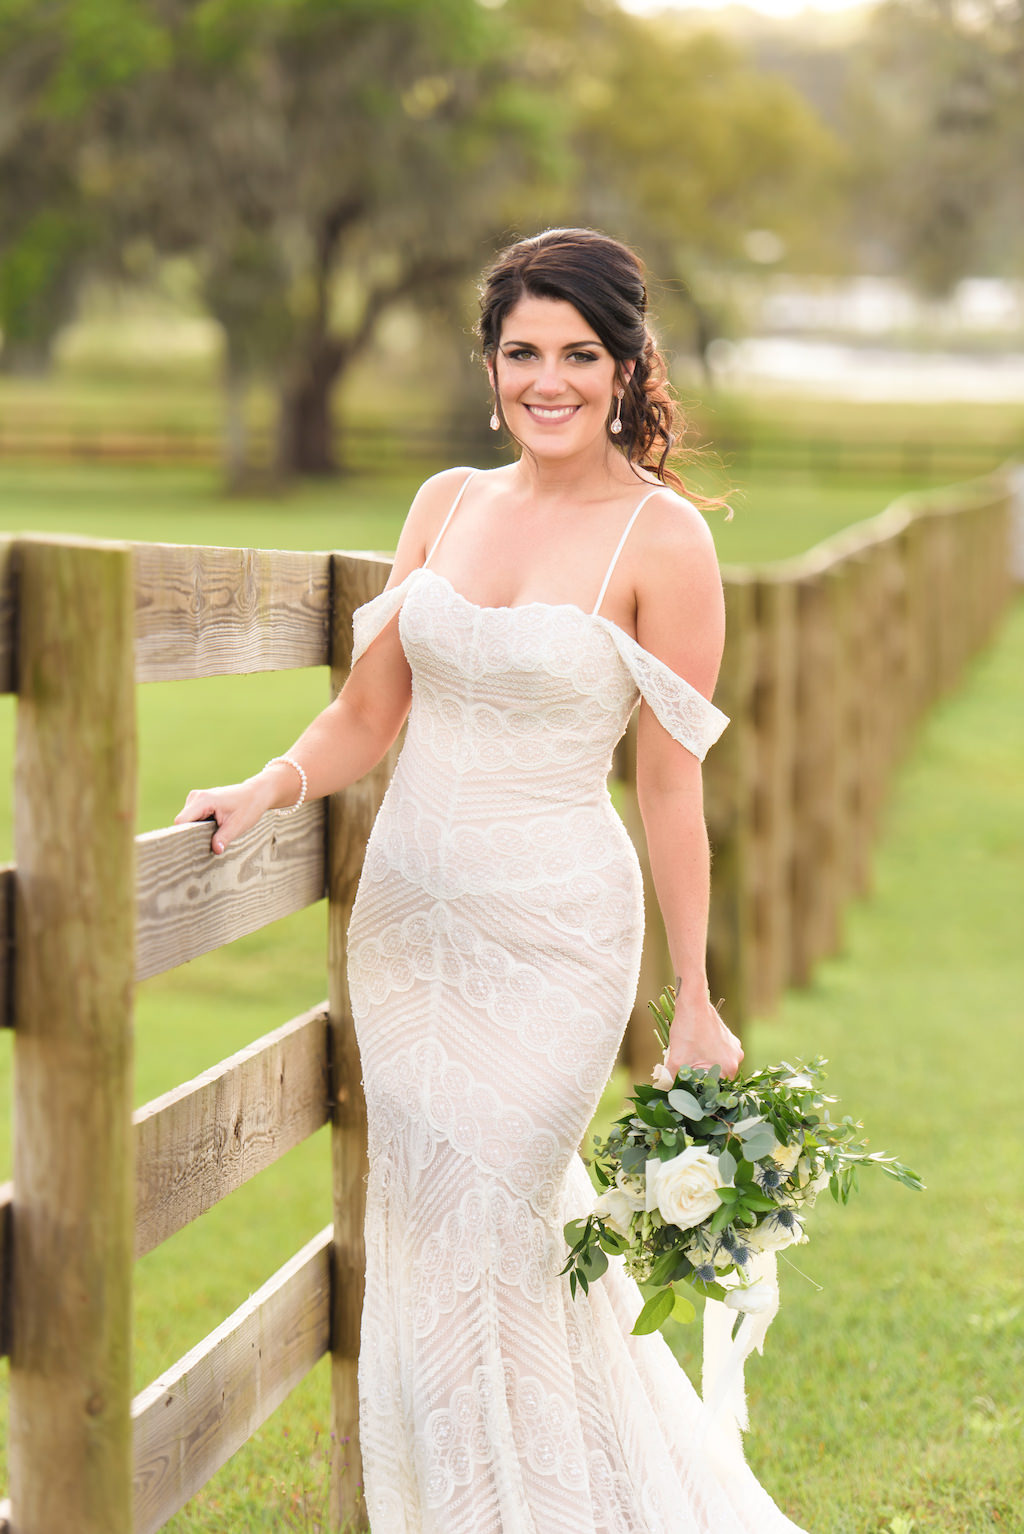 Classic Florida Bride Beauty Wedding Portrait in Wtoo Watters Lace Fitted Off the Shoulder Wedding Dress Holding Organic Greenery and White, Ivory Floral Bouquet | Tampa Bay Wedding Florist Bruce Wayne Florals